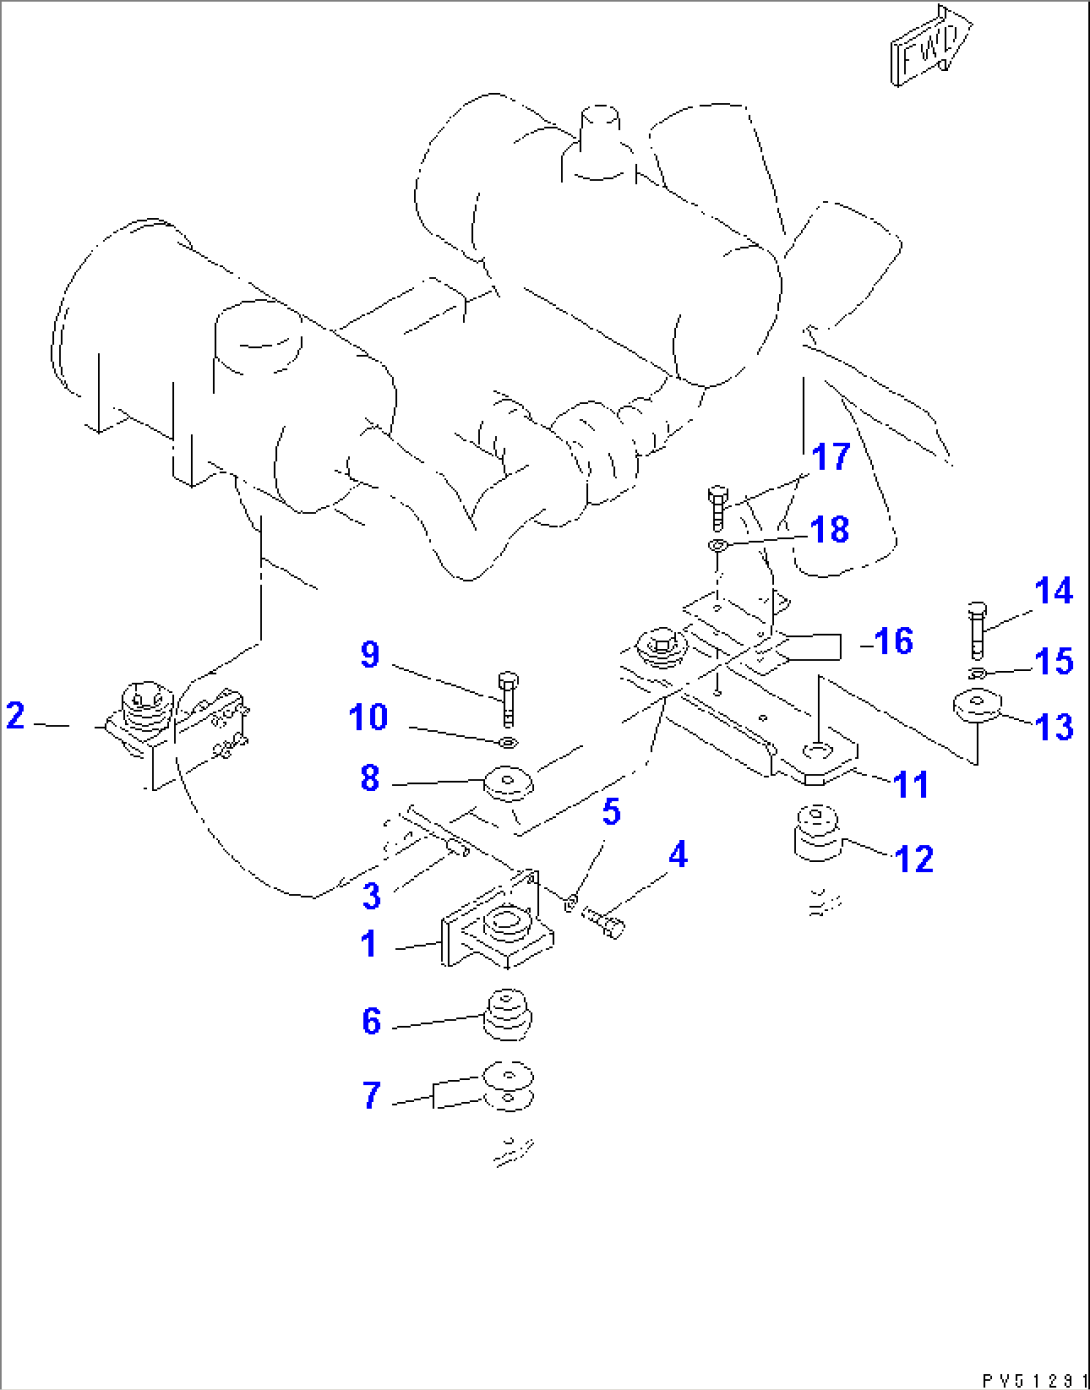 ENGINE MOUNTING PARTS(#11001-11086)